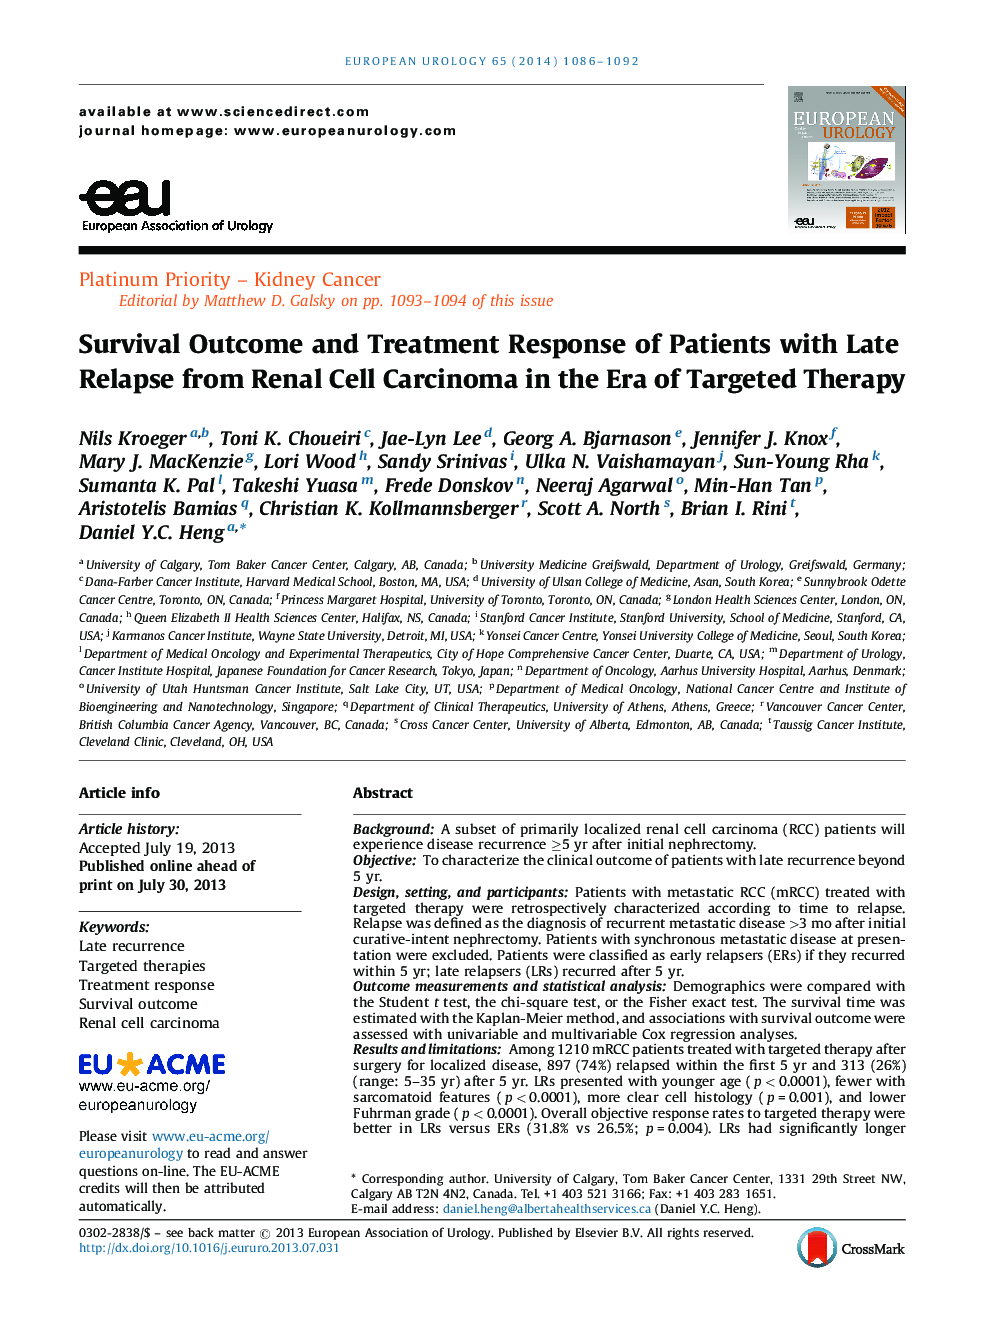 Survival Outcome and Treatment Response of Patients with Late Relapse from Renal Cell Carcinoma in the Era of Targeted Therapy